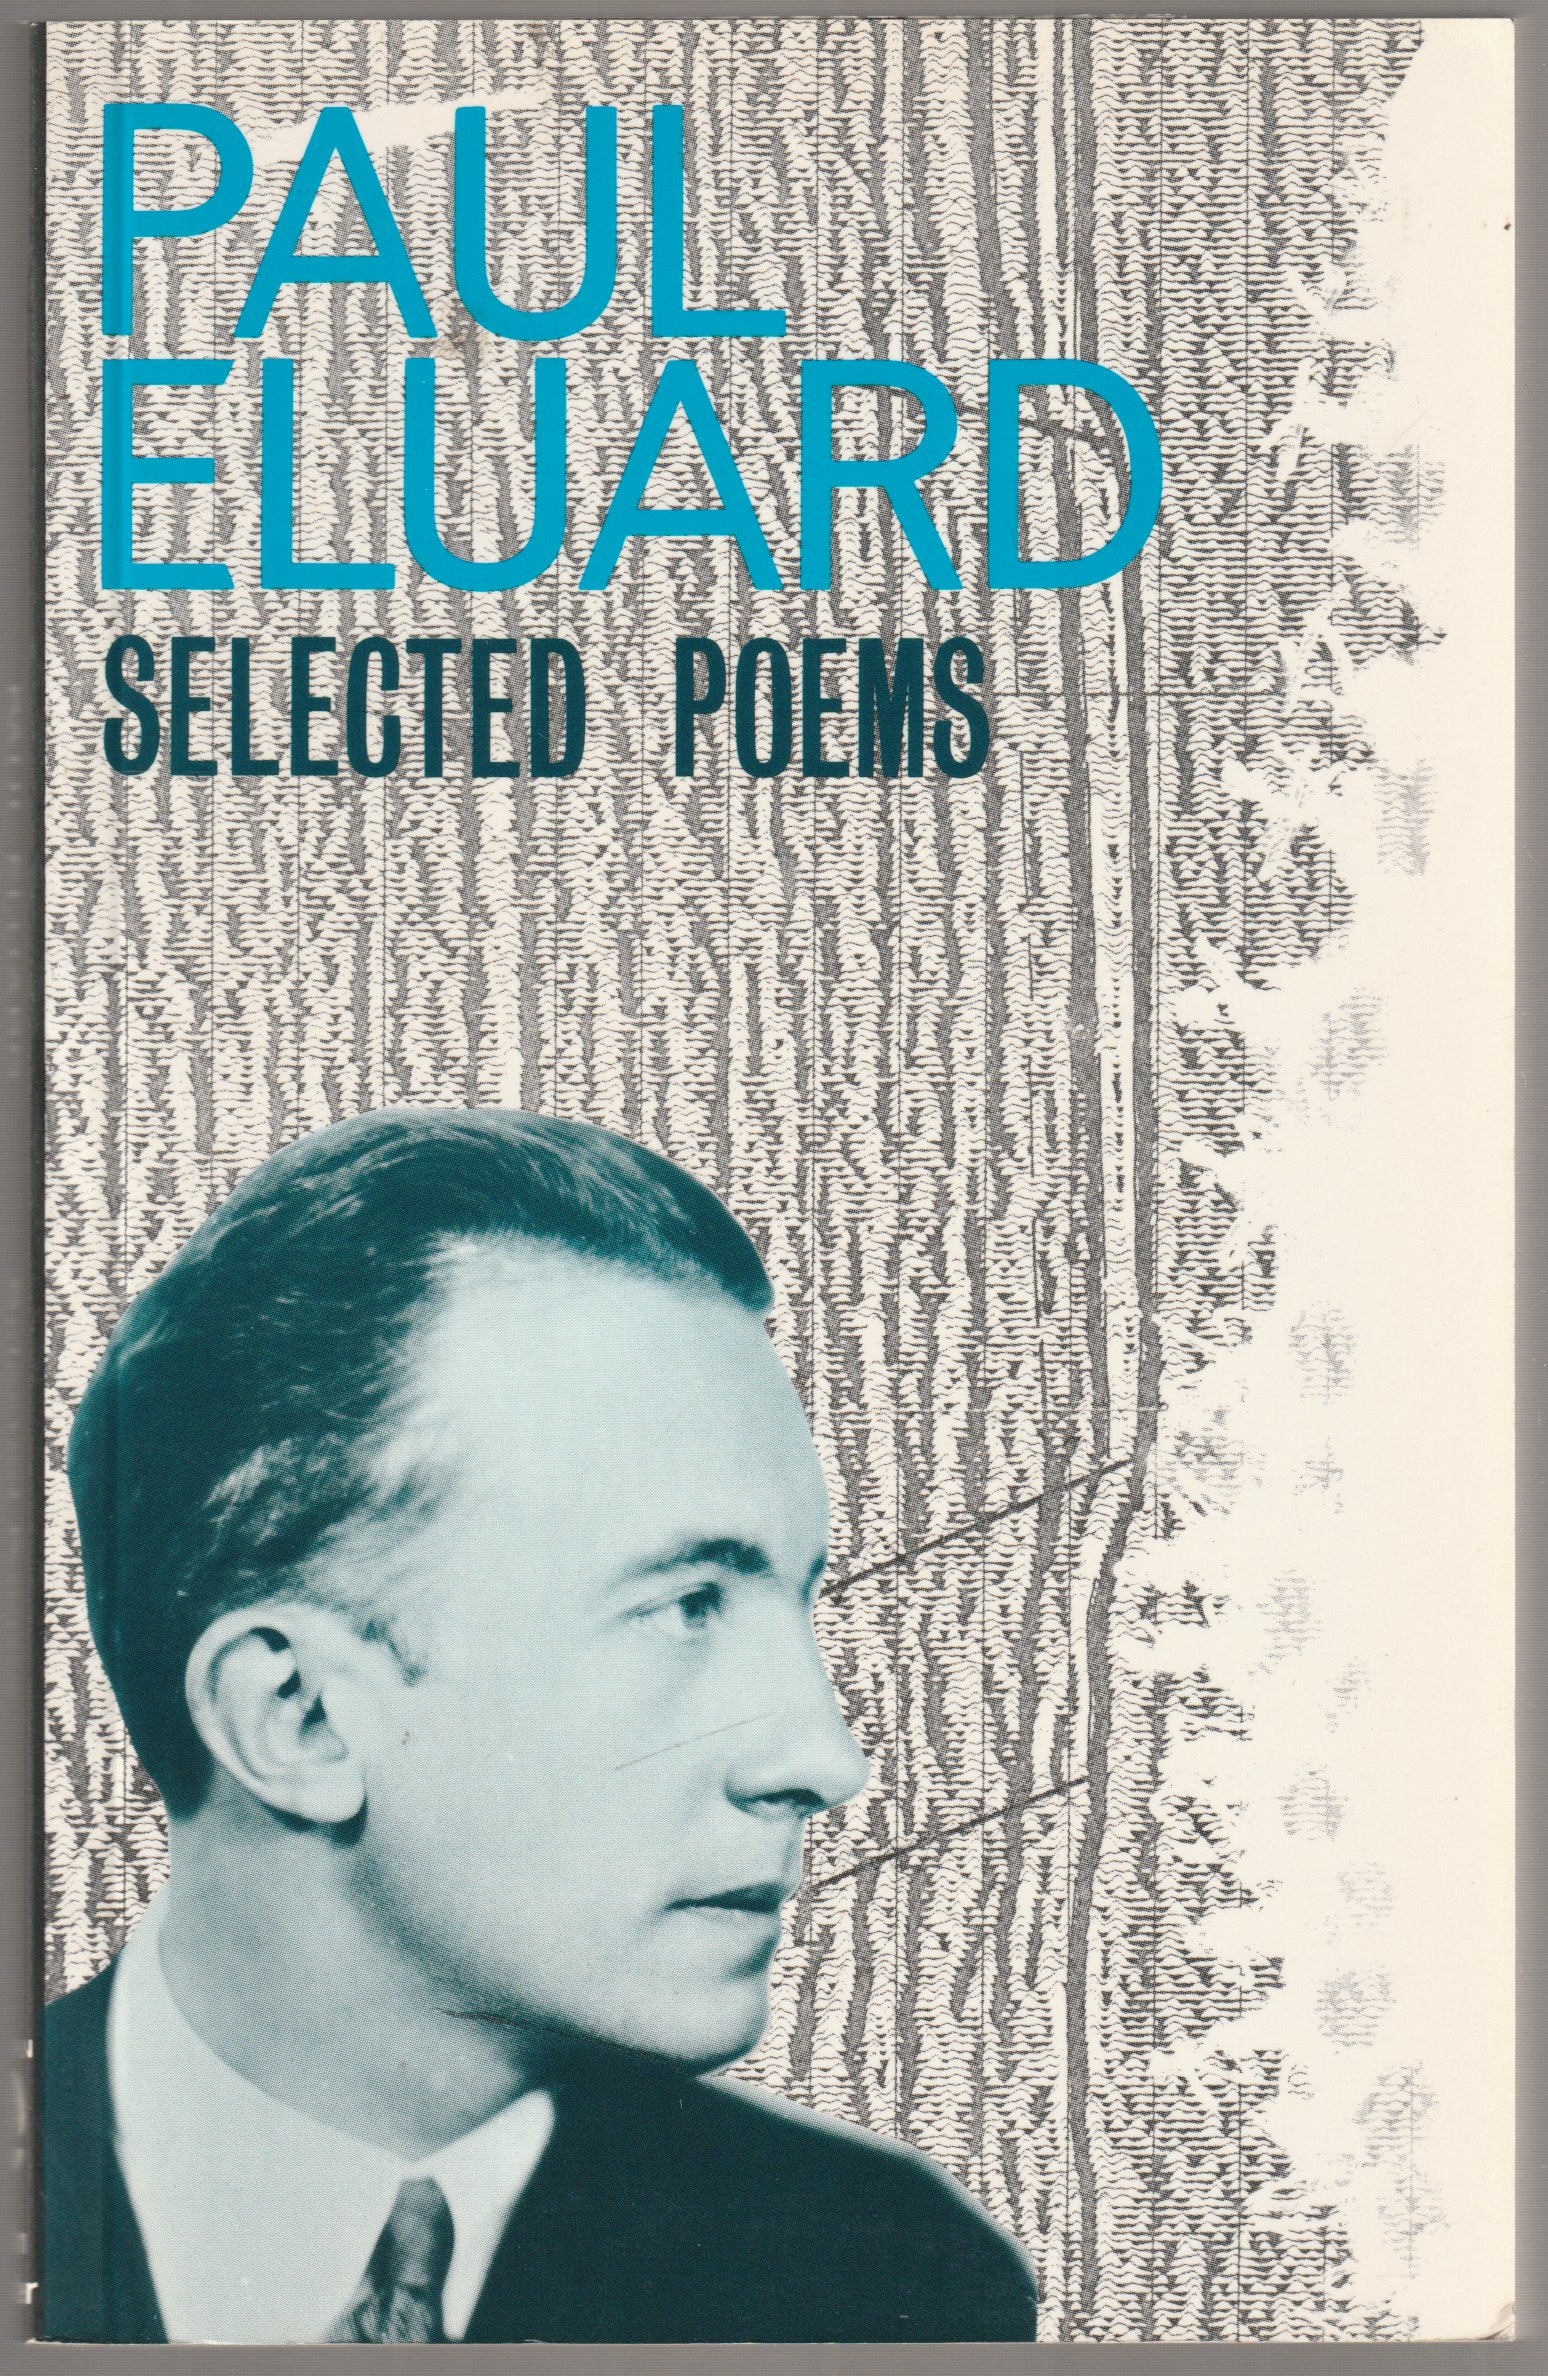 Selected poems.